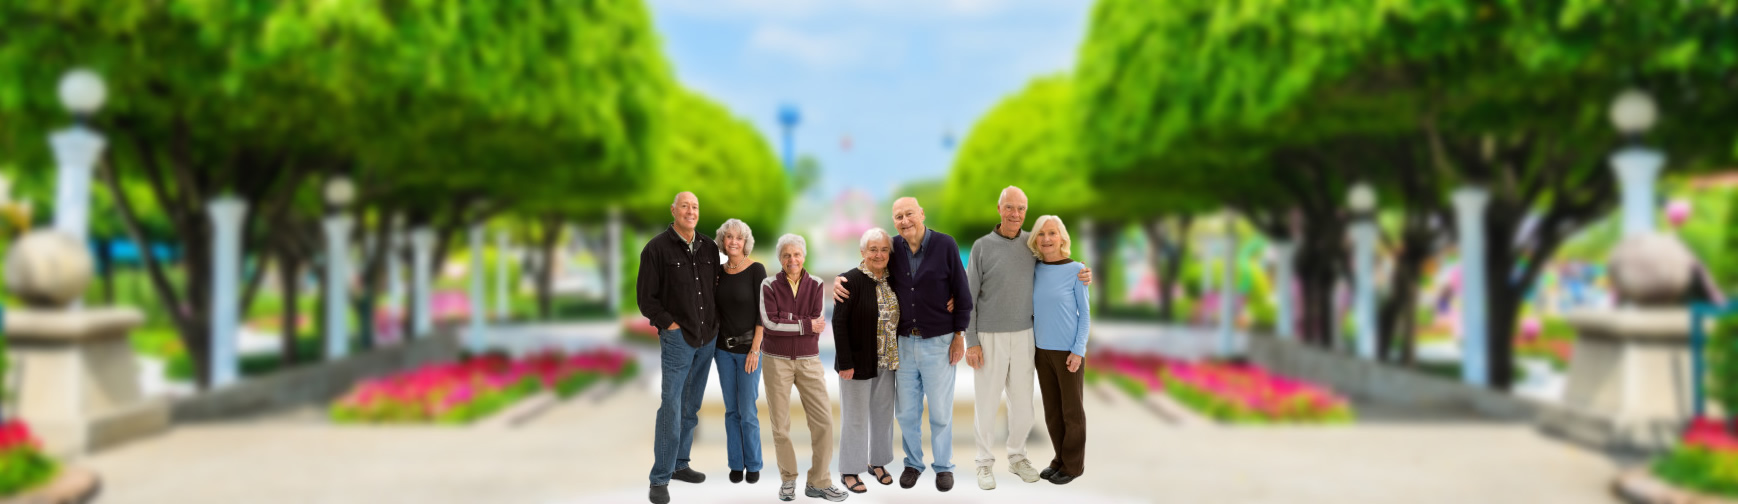 one day bus trips for seniors near me